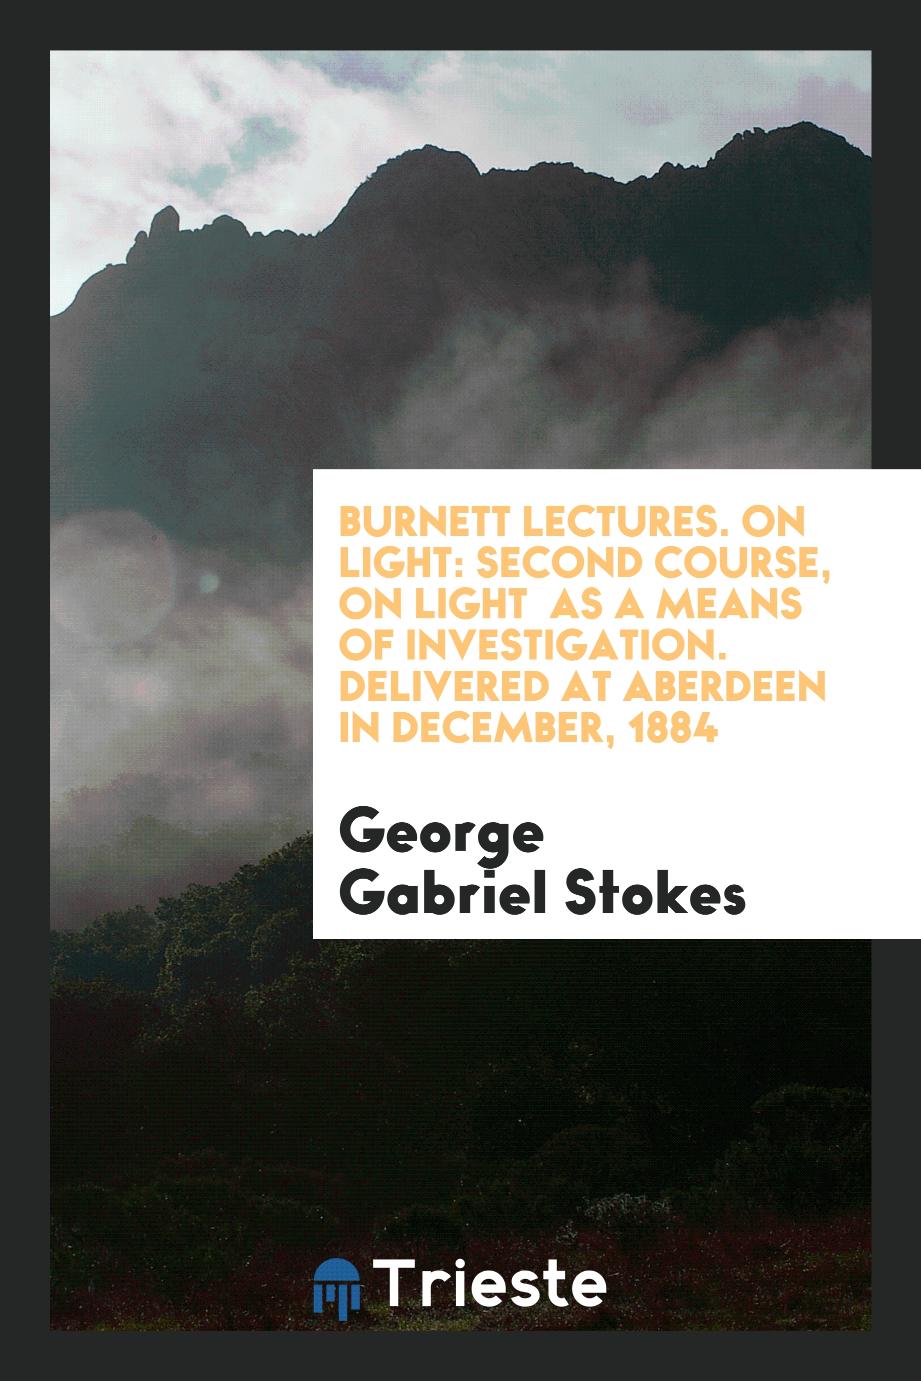 Burnett Lectures. On Light: Second Course, on Light as a Means of Investigation. Delivered at Aberdeen in December, 1884